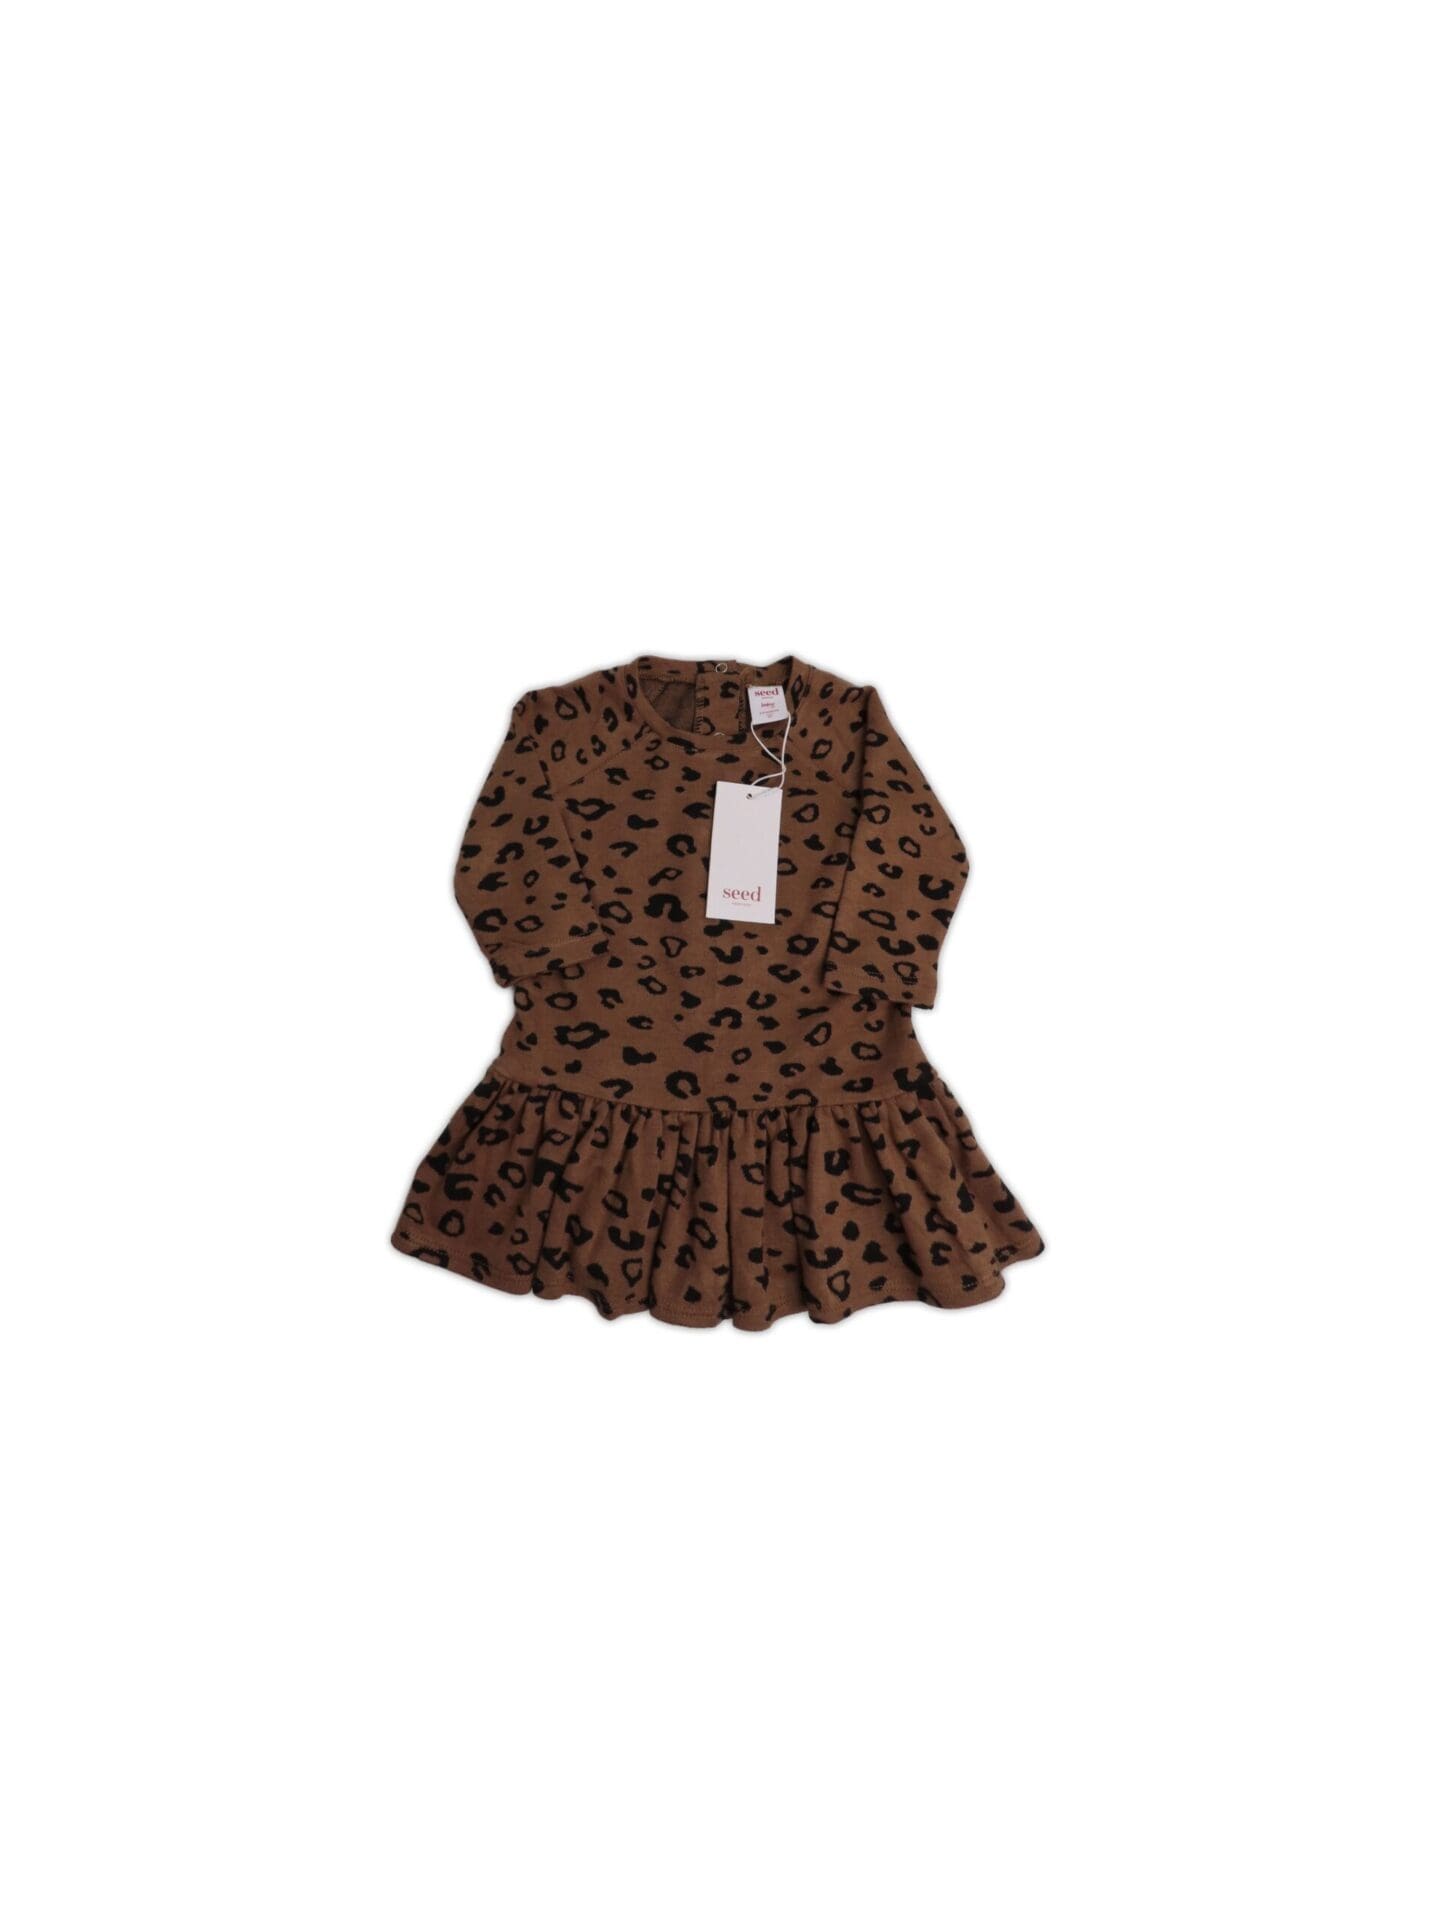 Leopard printed dress with long sleeves and a frilly hem.